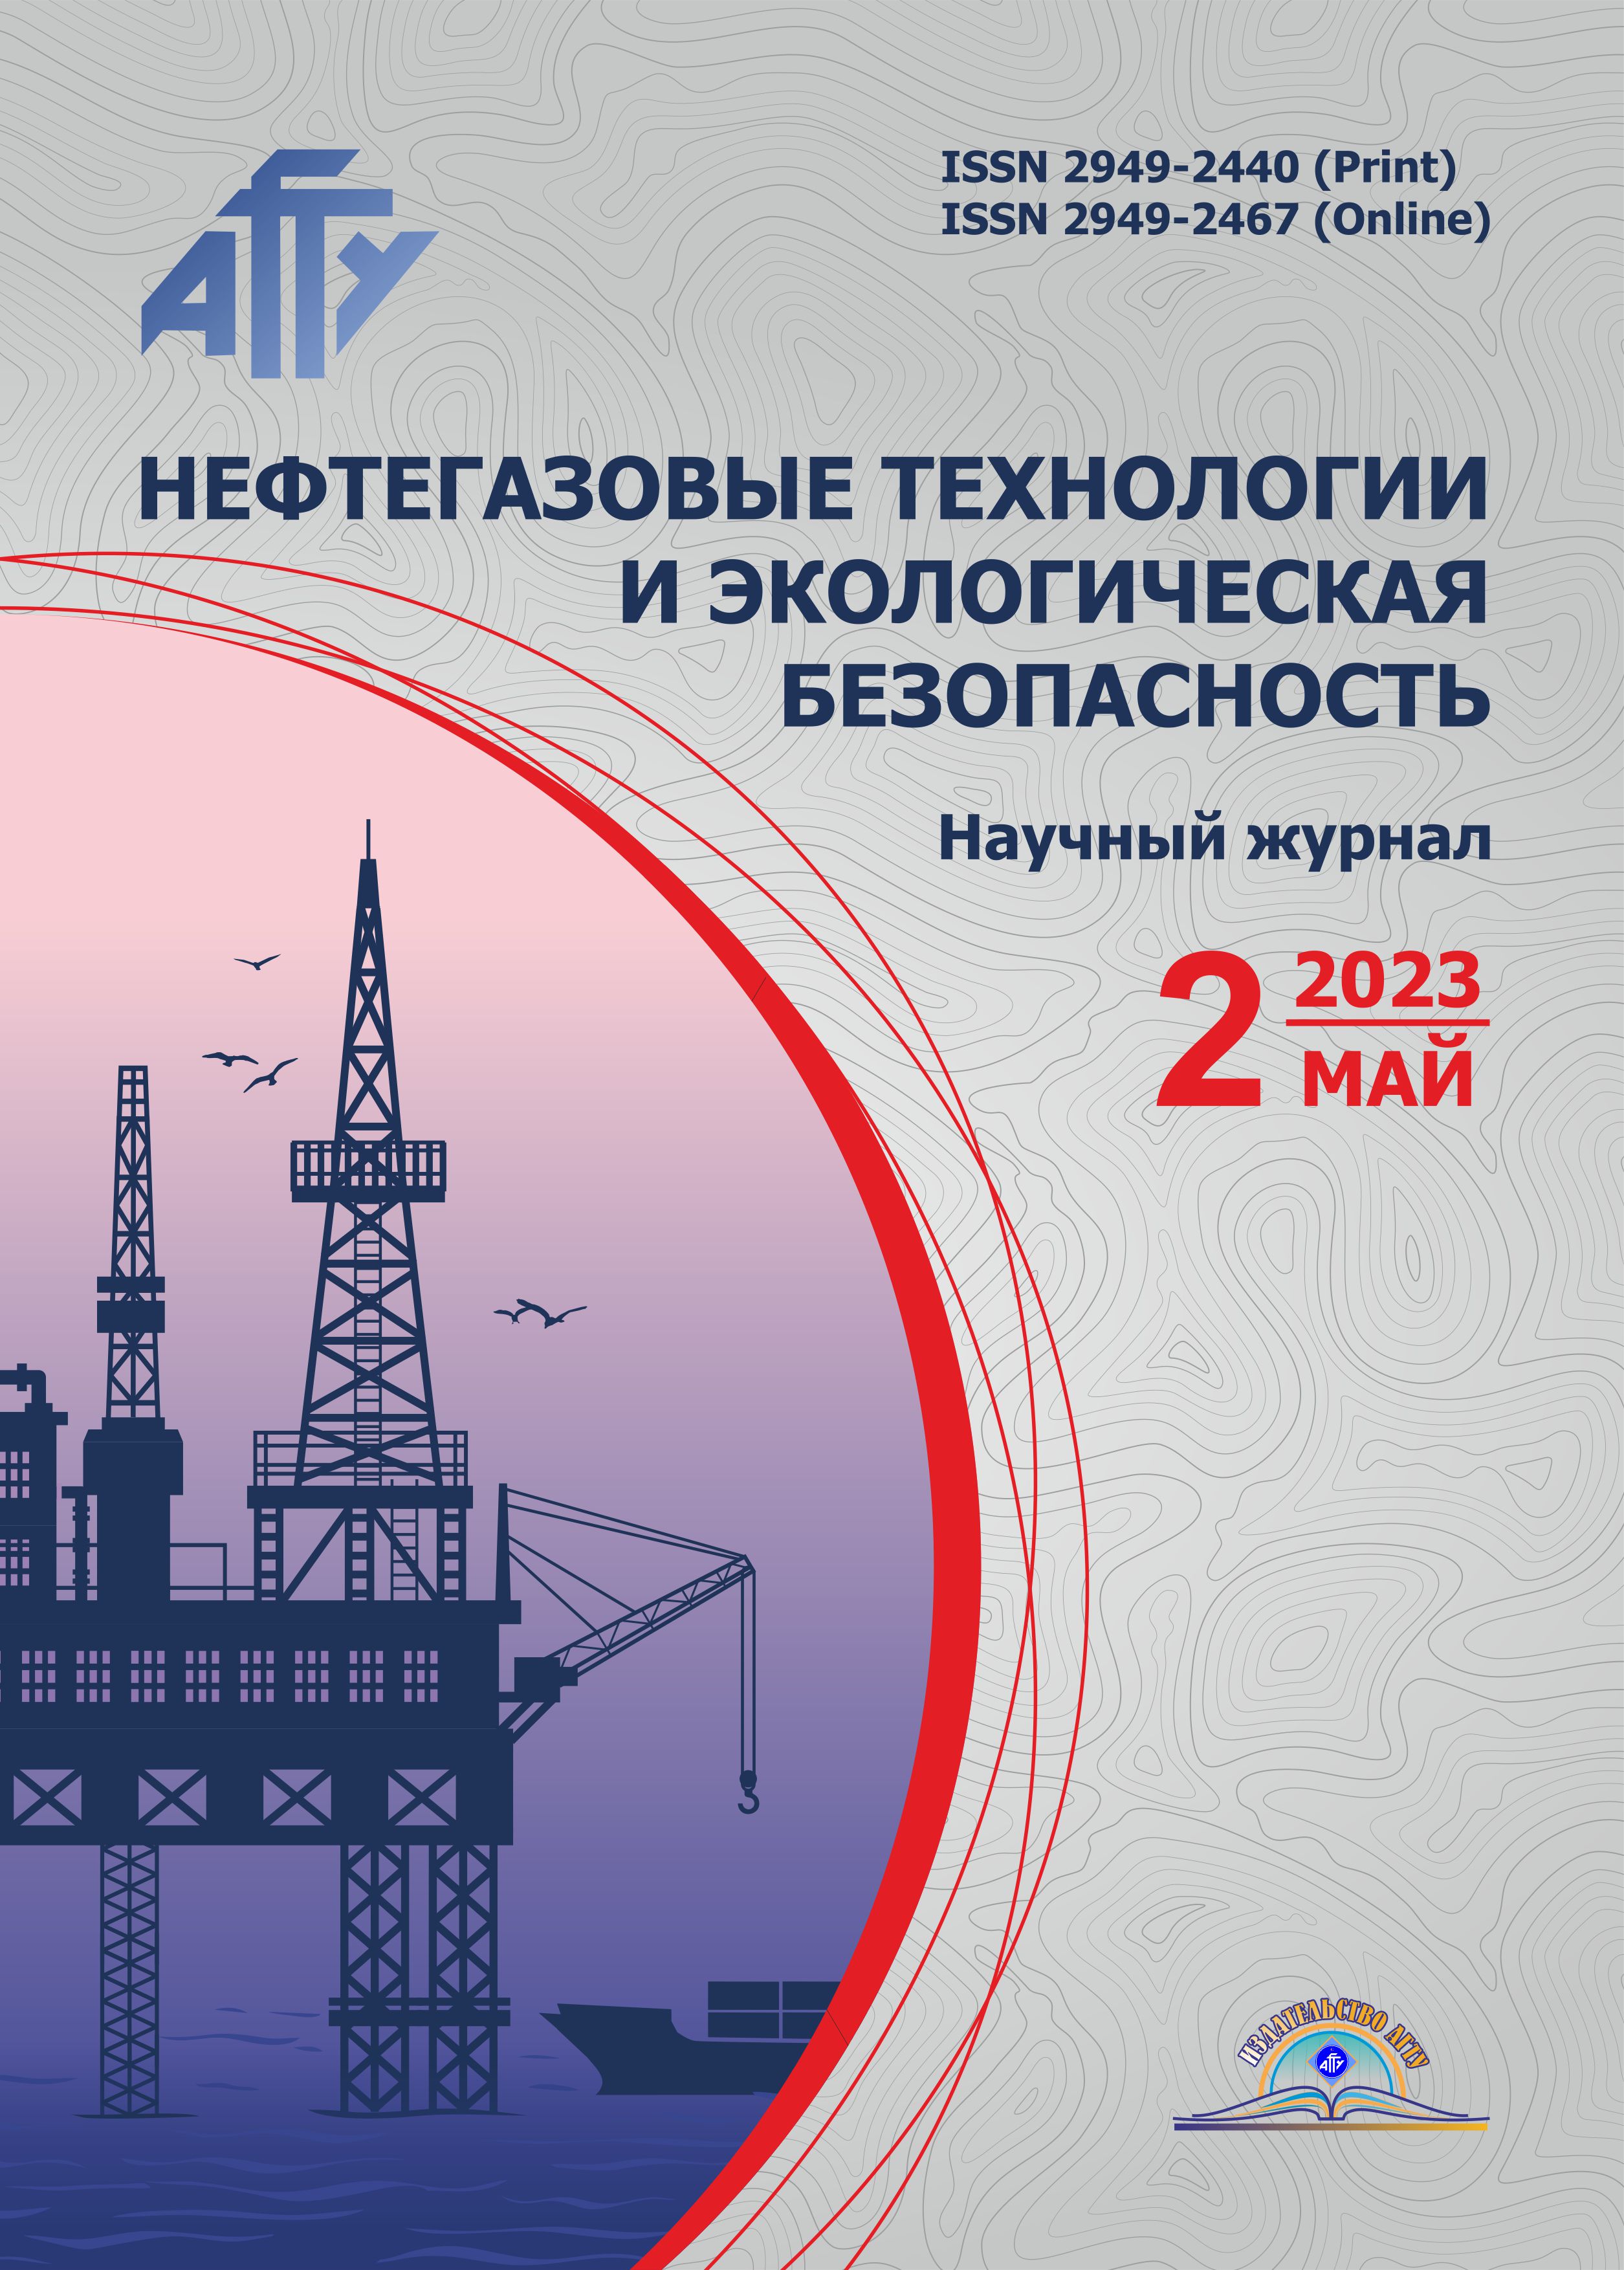                         Localization of stock of abandoned wells and typification of territory of Astrakhan region by levels of environmental risk
            